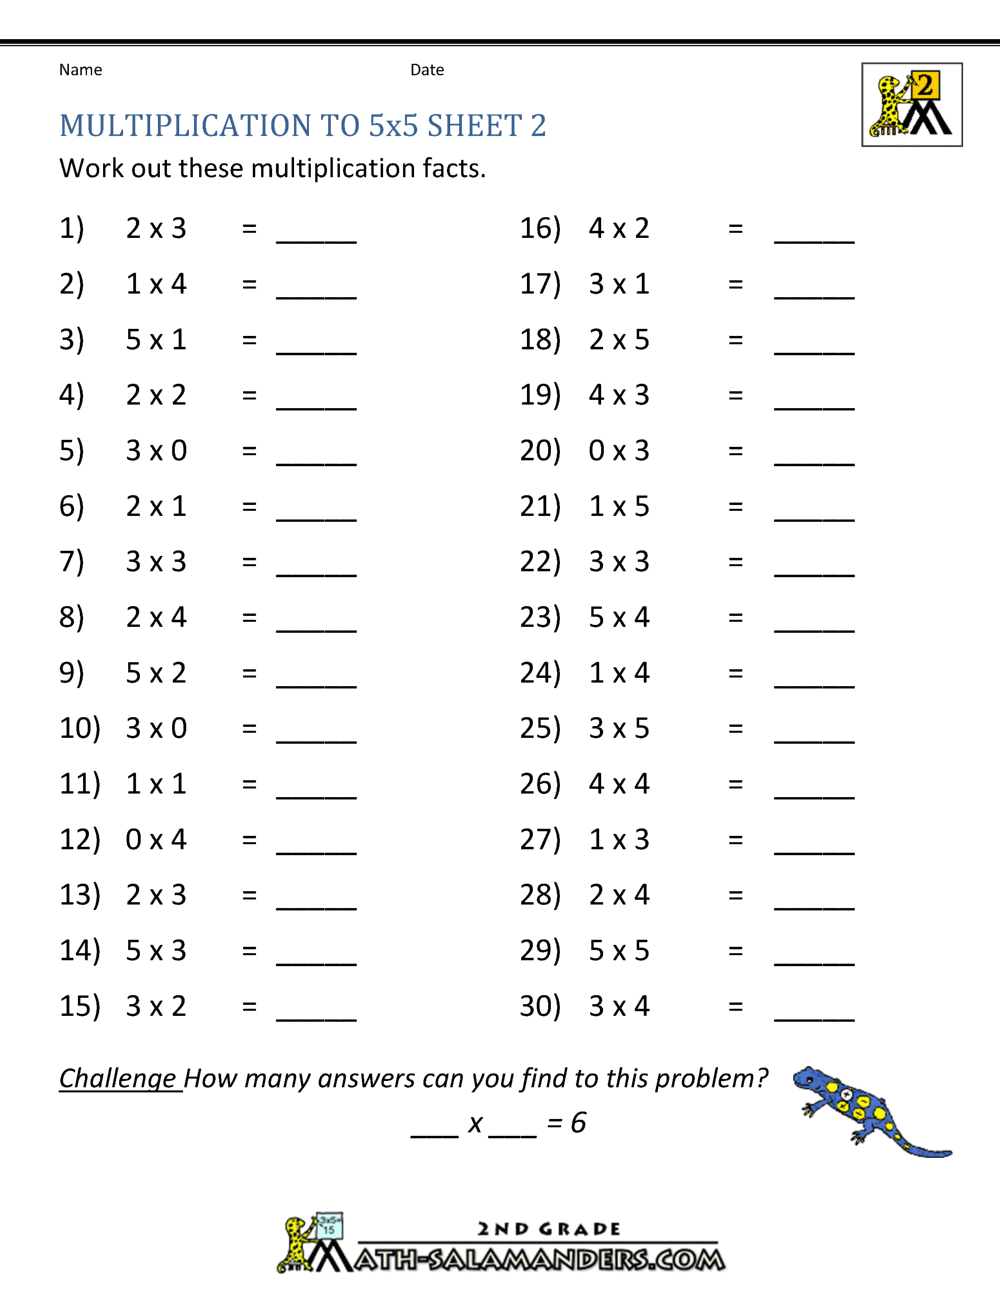 multiplication-practice-worksheets-to-5x5